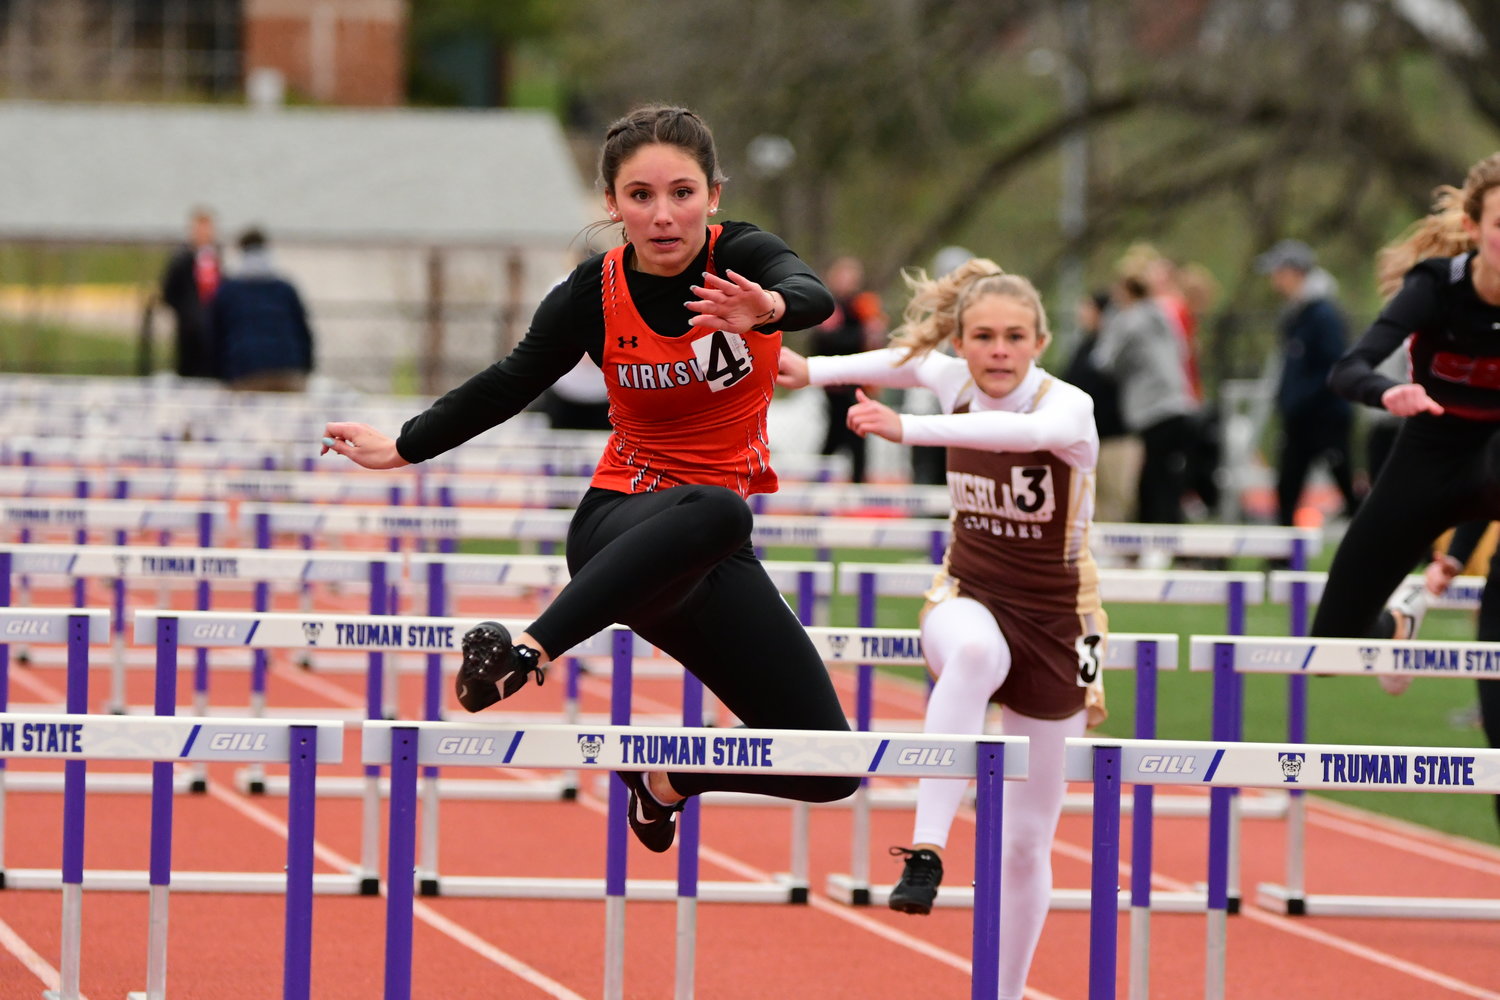 Kirksville's Jersey Herbst leads the pack in a girls 100m hurdles race at Tuesday's Truman State High School Invitational. She set a new meet record with a time of 17.18 seconds.